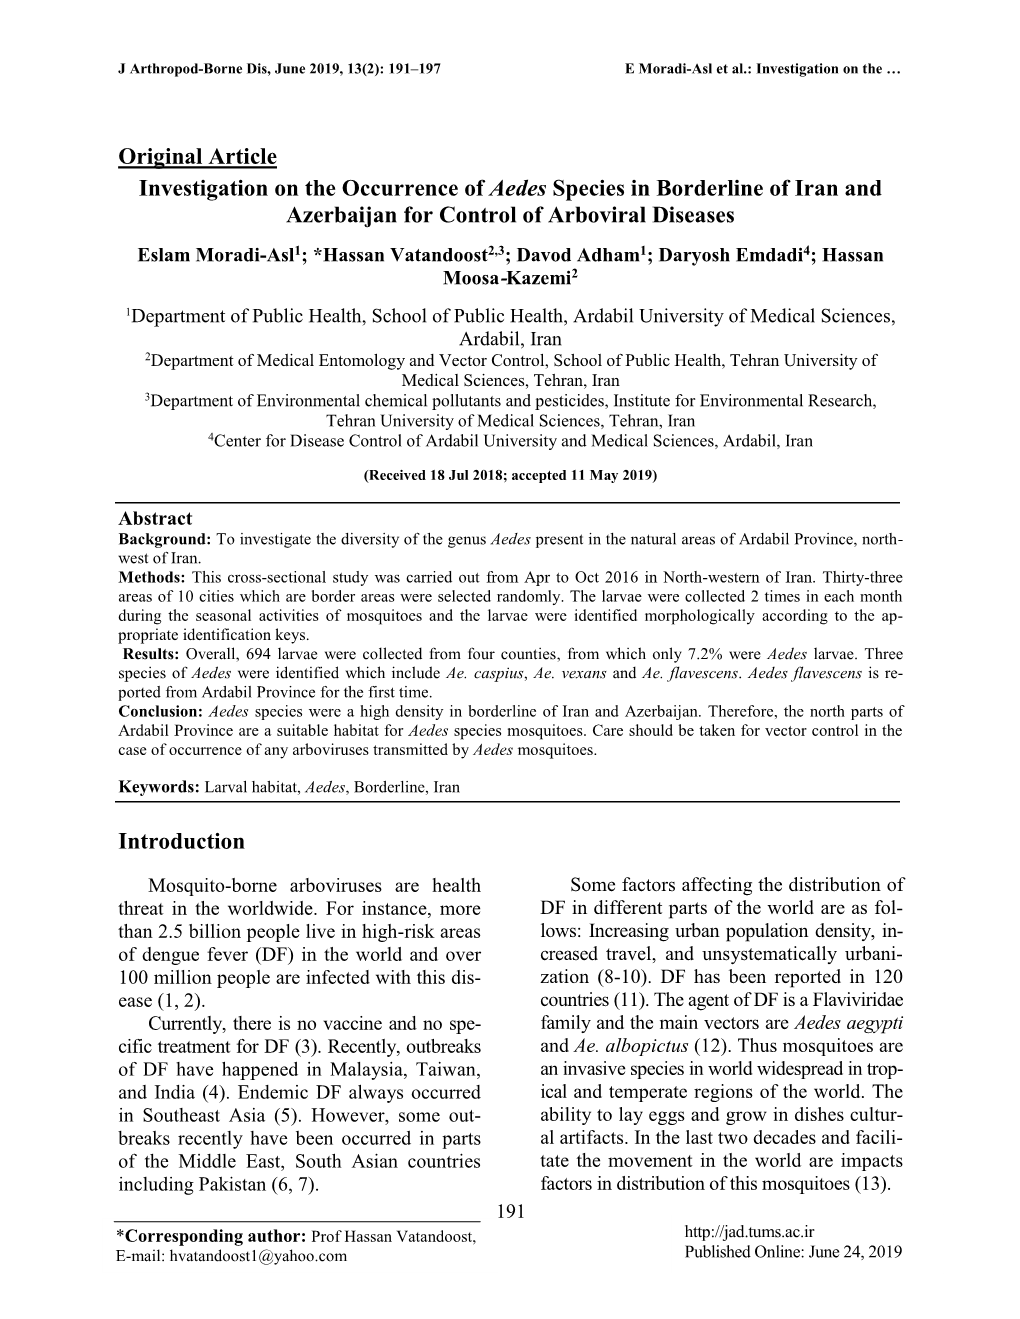 Original Article Investigation on the Occurrence of Aedes Species in Borderline of Iran and Azerbaijan for Control of Arboviral Diseases